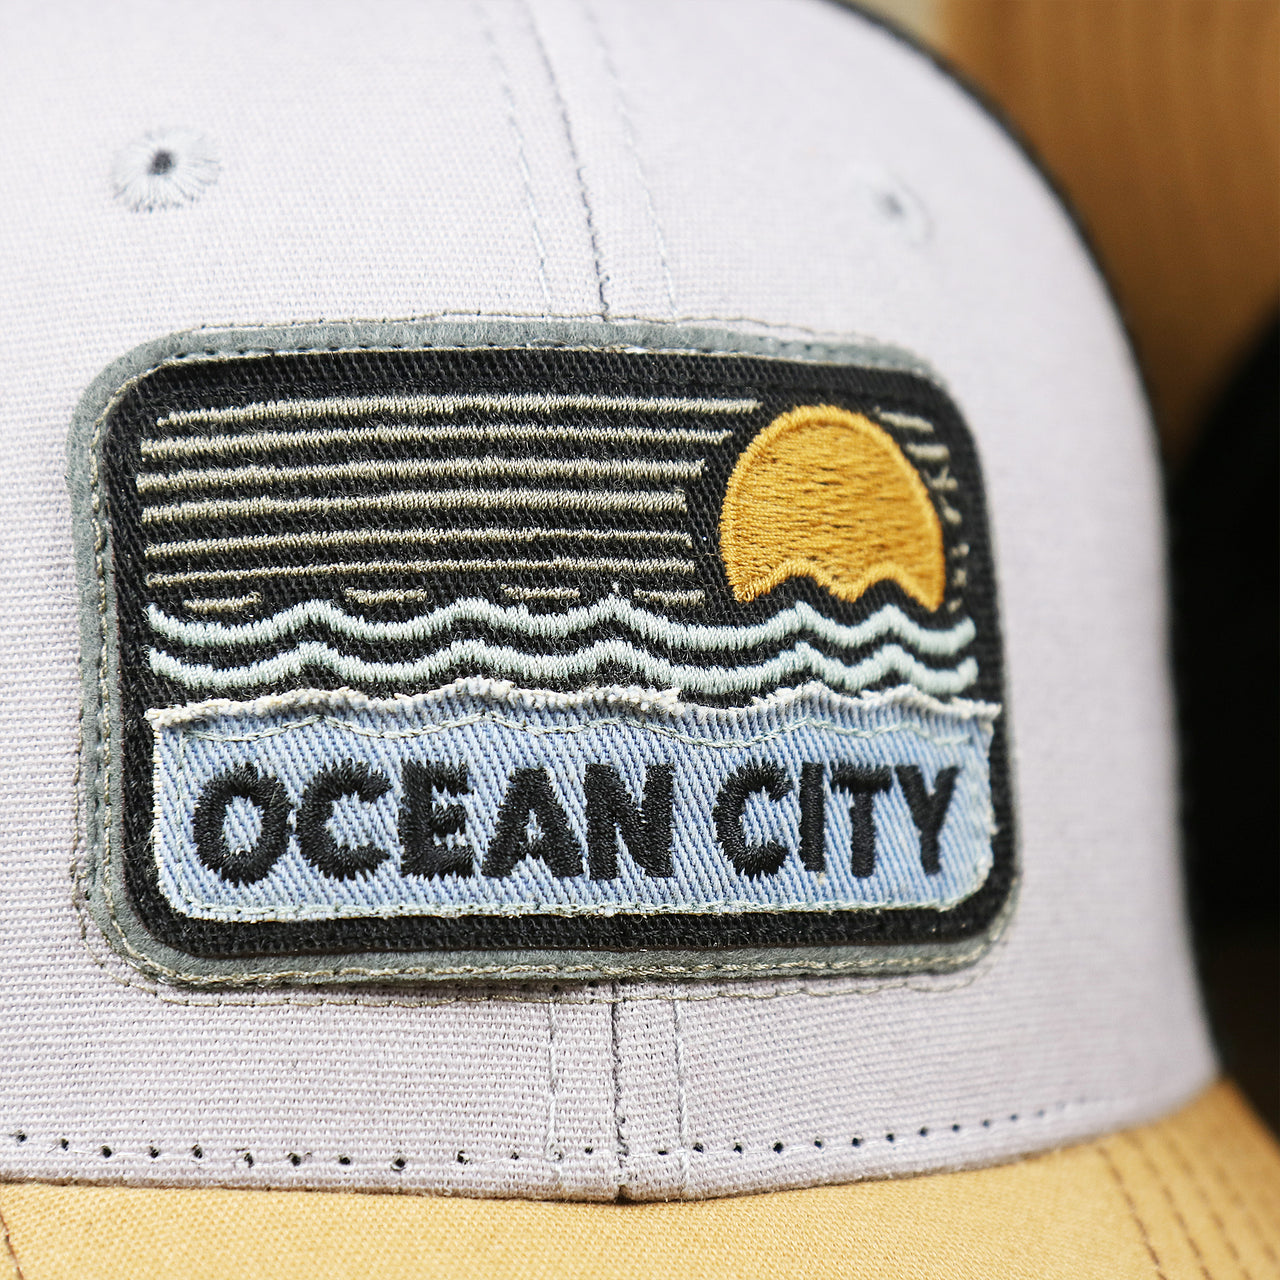 The Ocean City Sunset Patch on the Youth New Jersey Ocean City Sunset Mesh Back Trucker Hat | Gray And Black Mesh Youth Trucker Hat